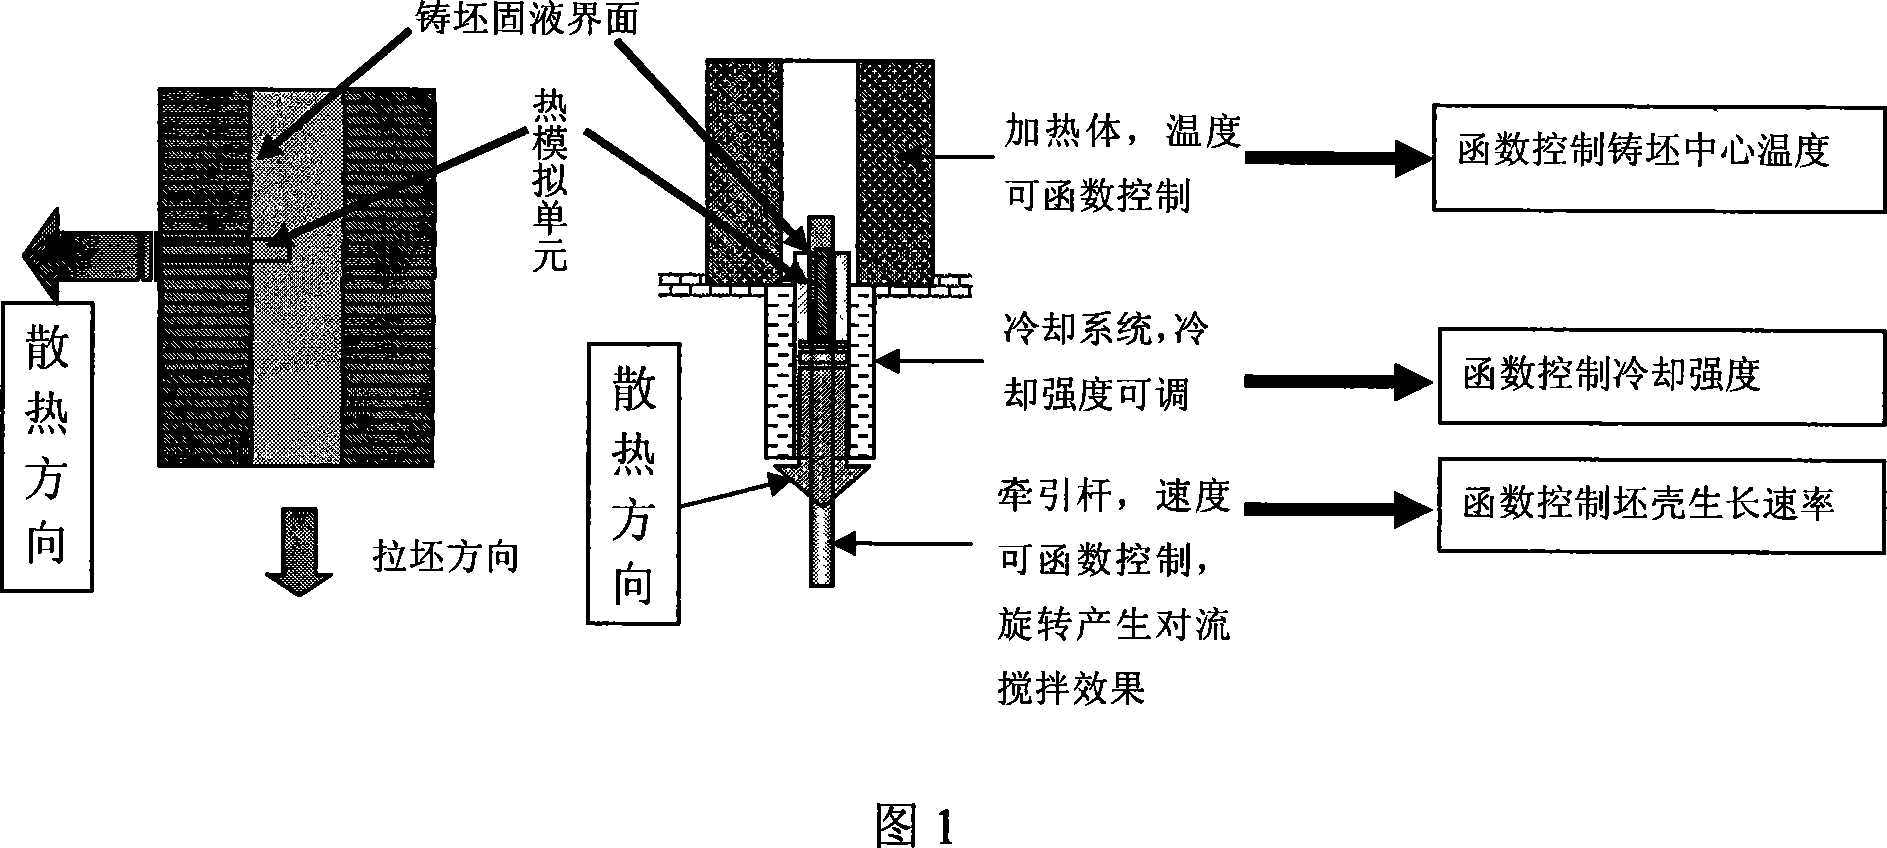 Physical simulating method and device during continuous-casting billet coagulation tissue growth process